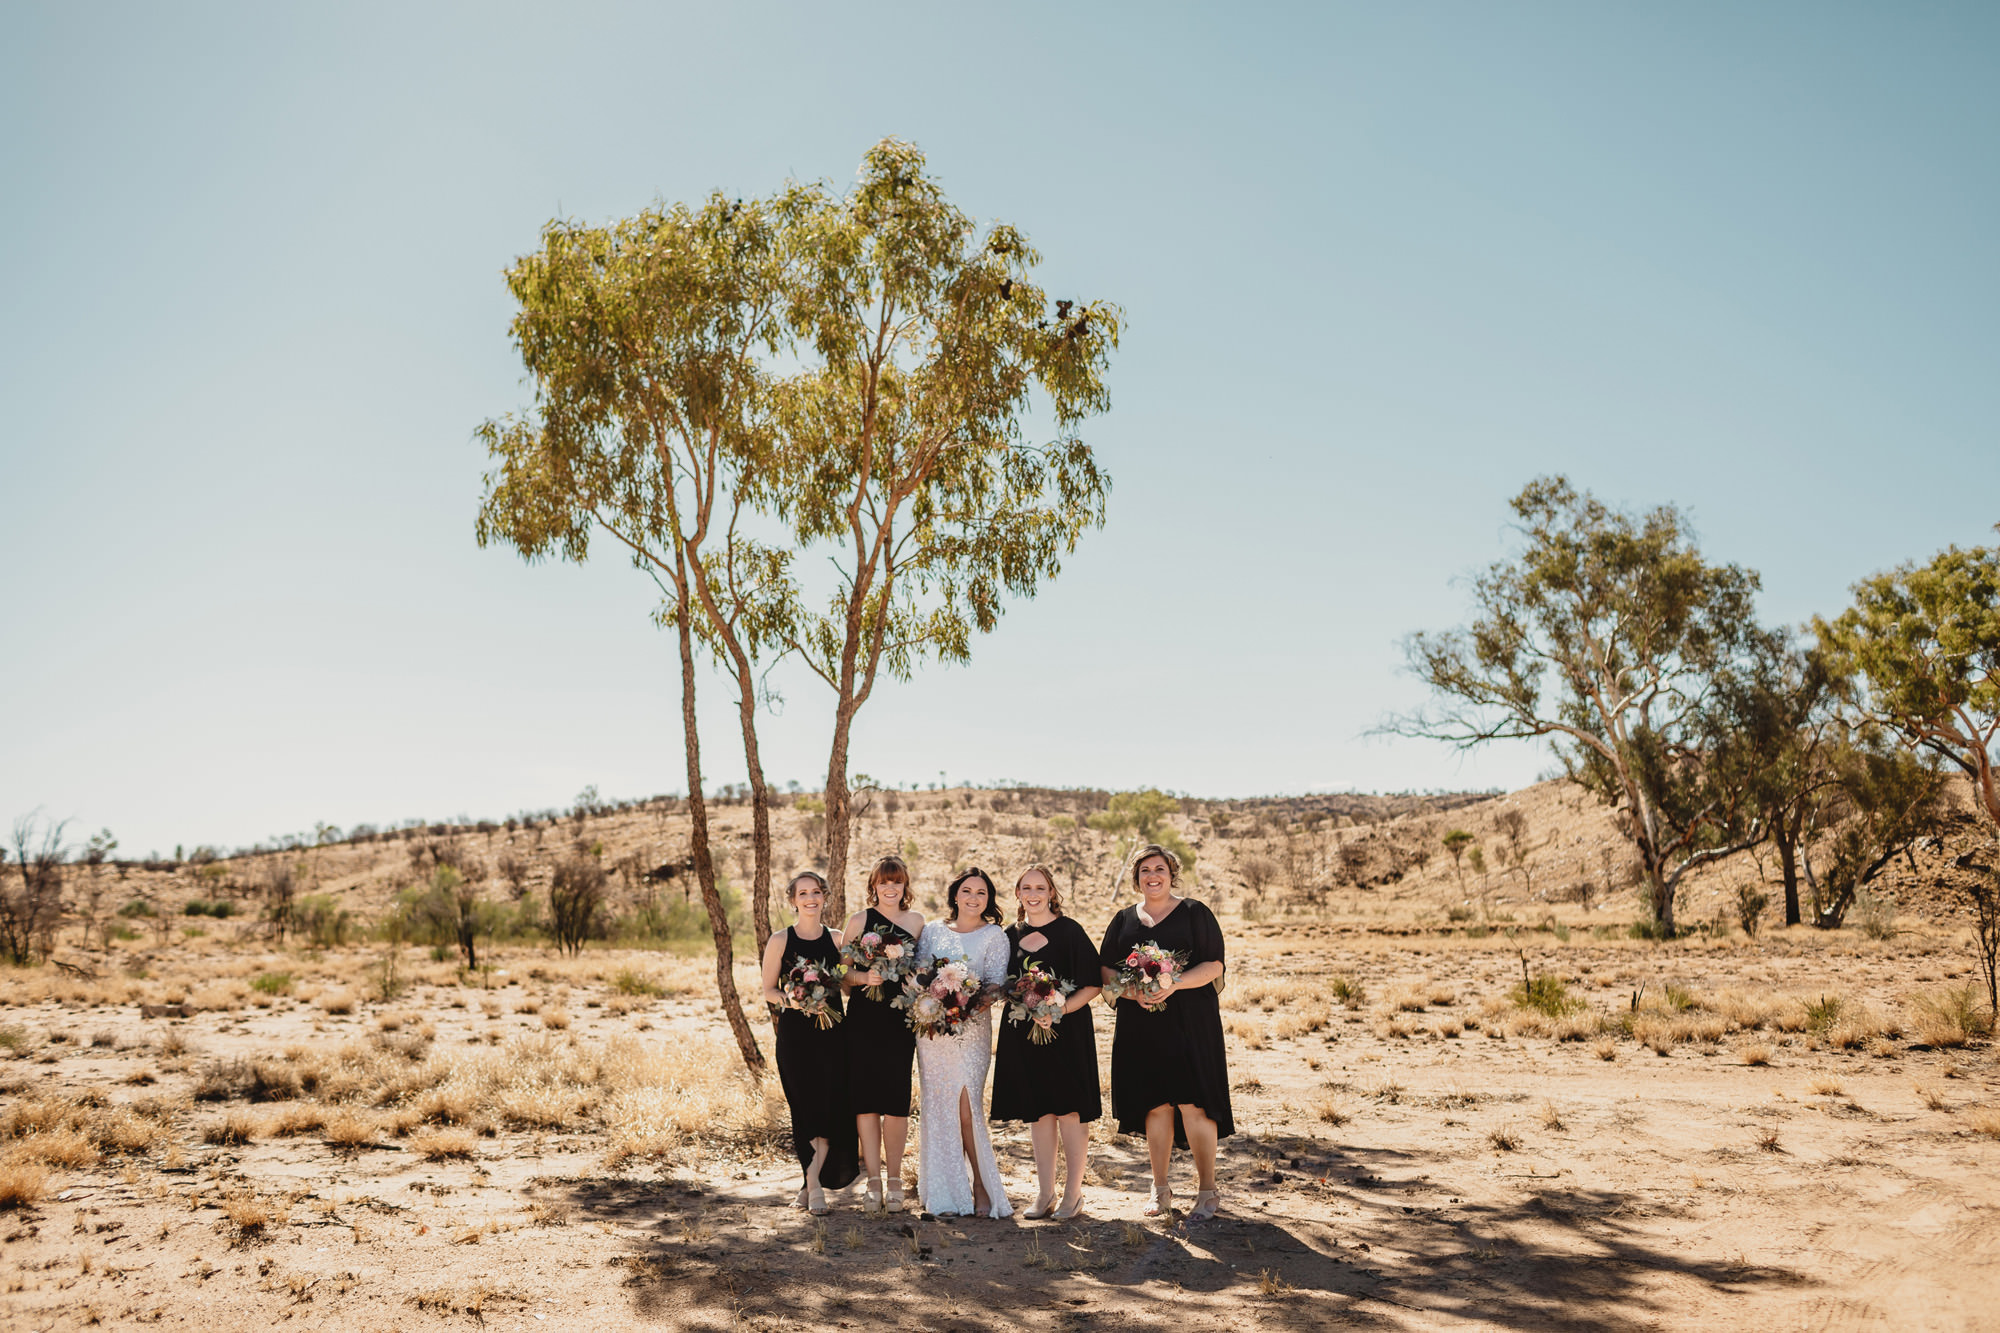 Alice springs wedding with bridal party